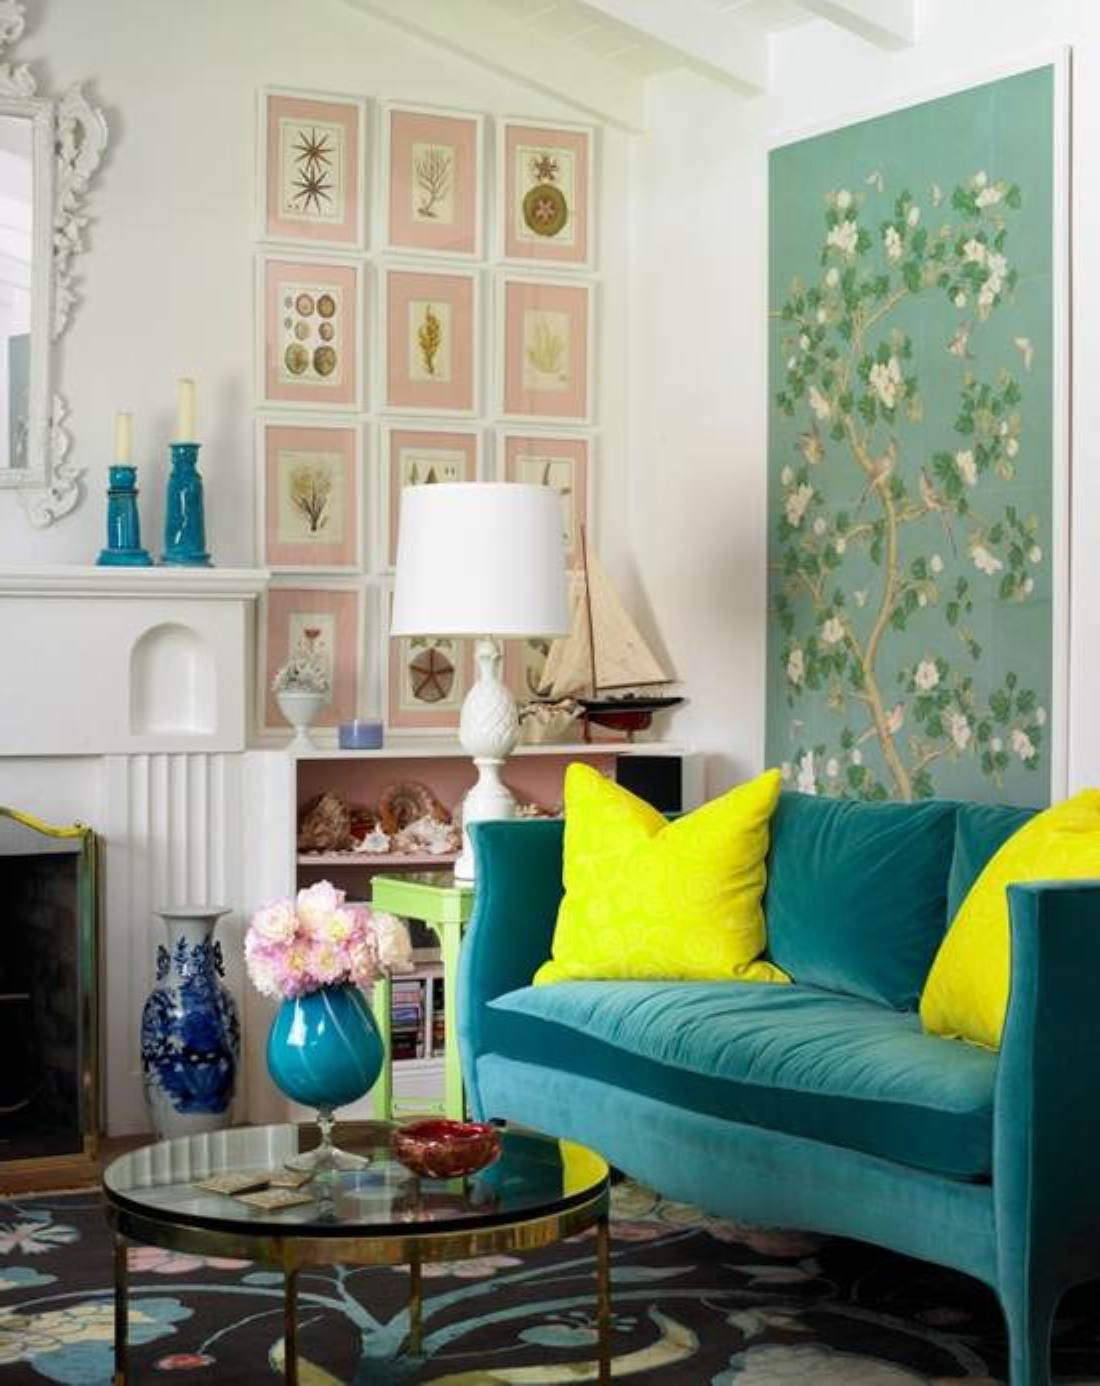 Small Space Living Room Designs
 30 Amazing Small Spaces Living Room Design Ideas